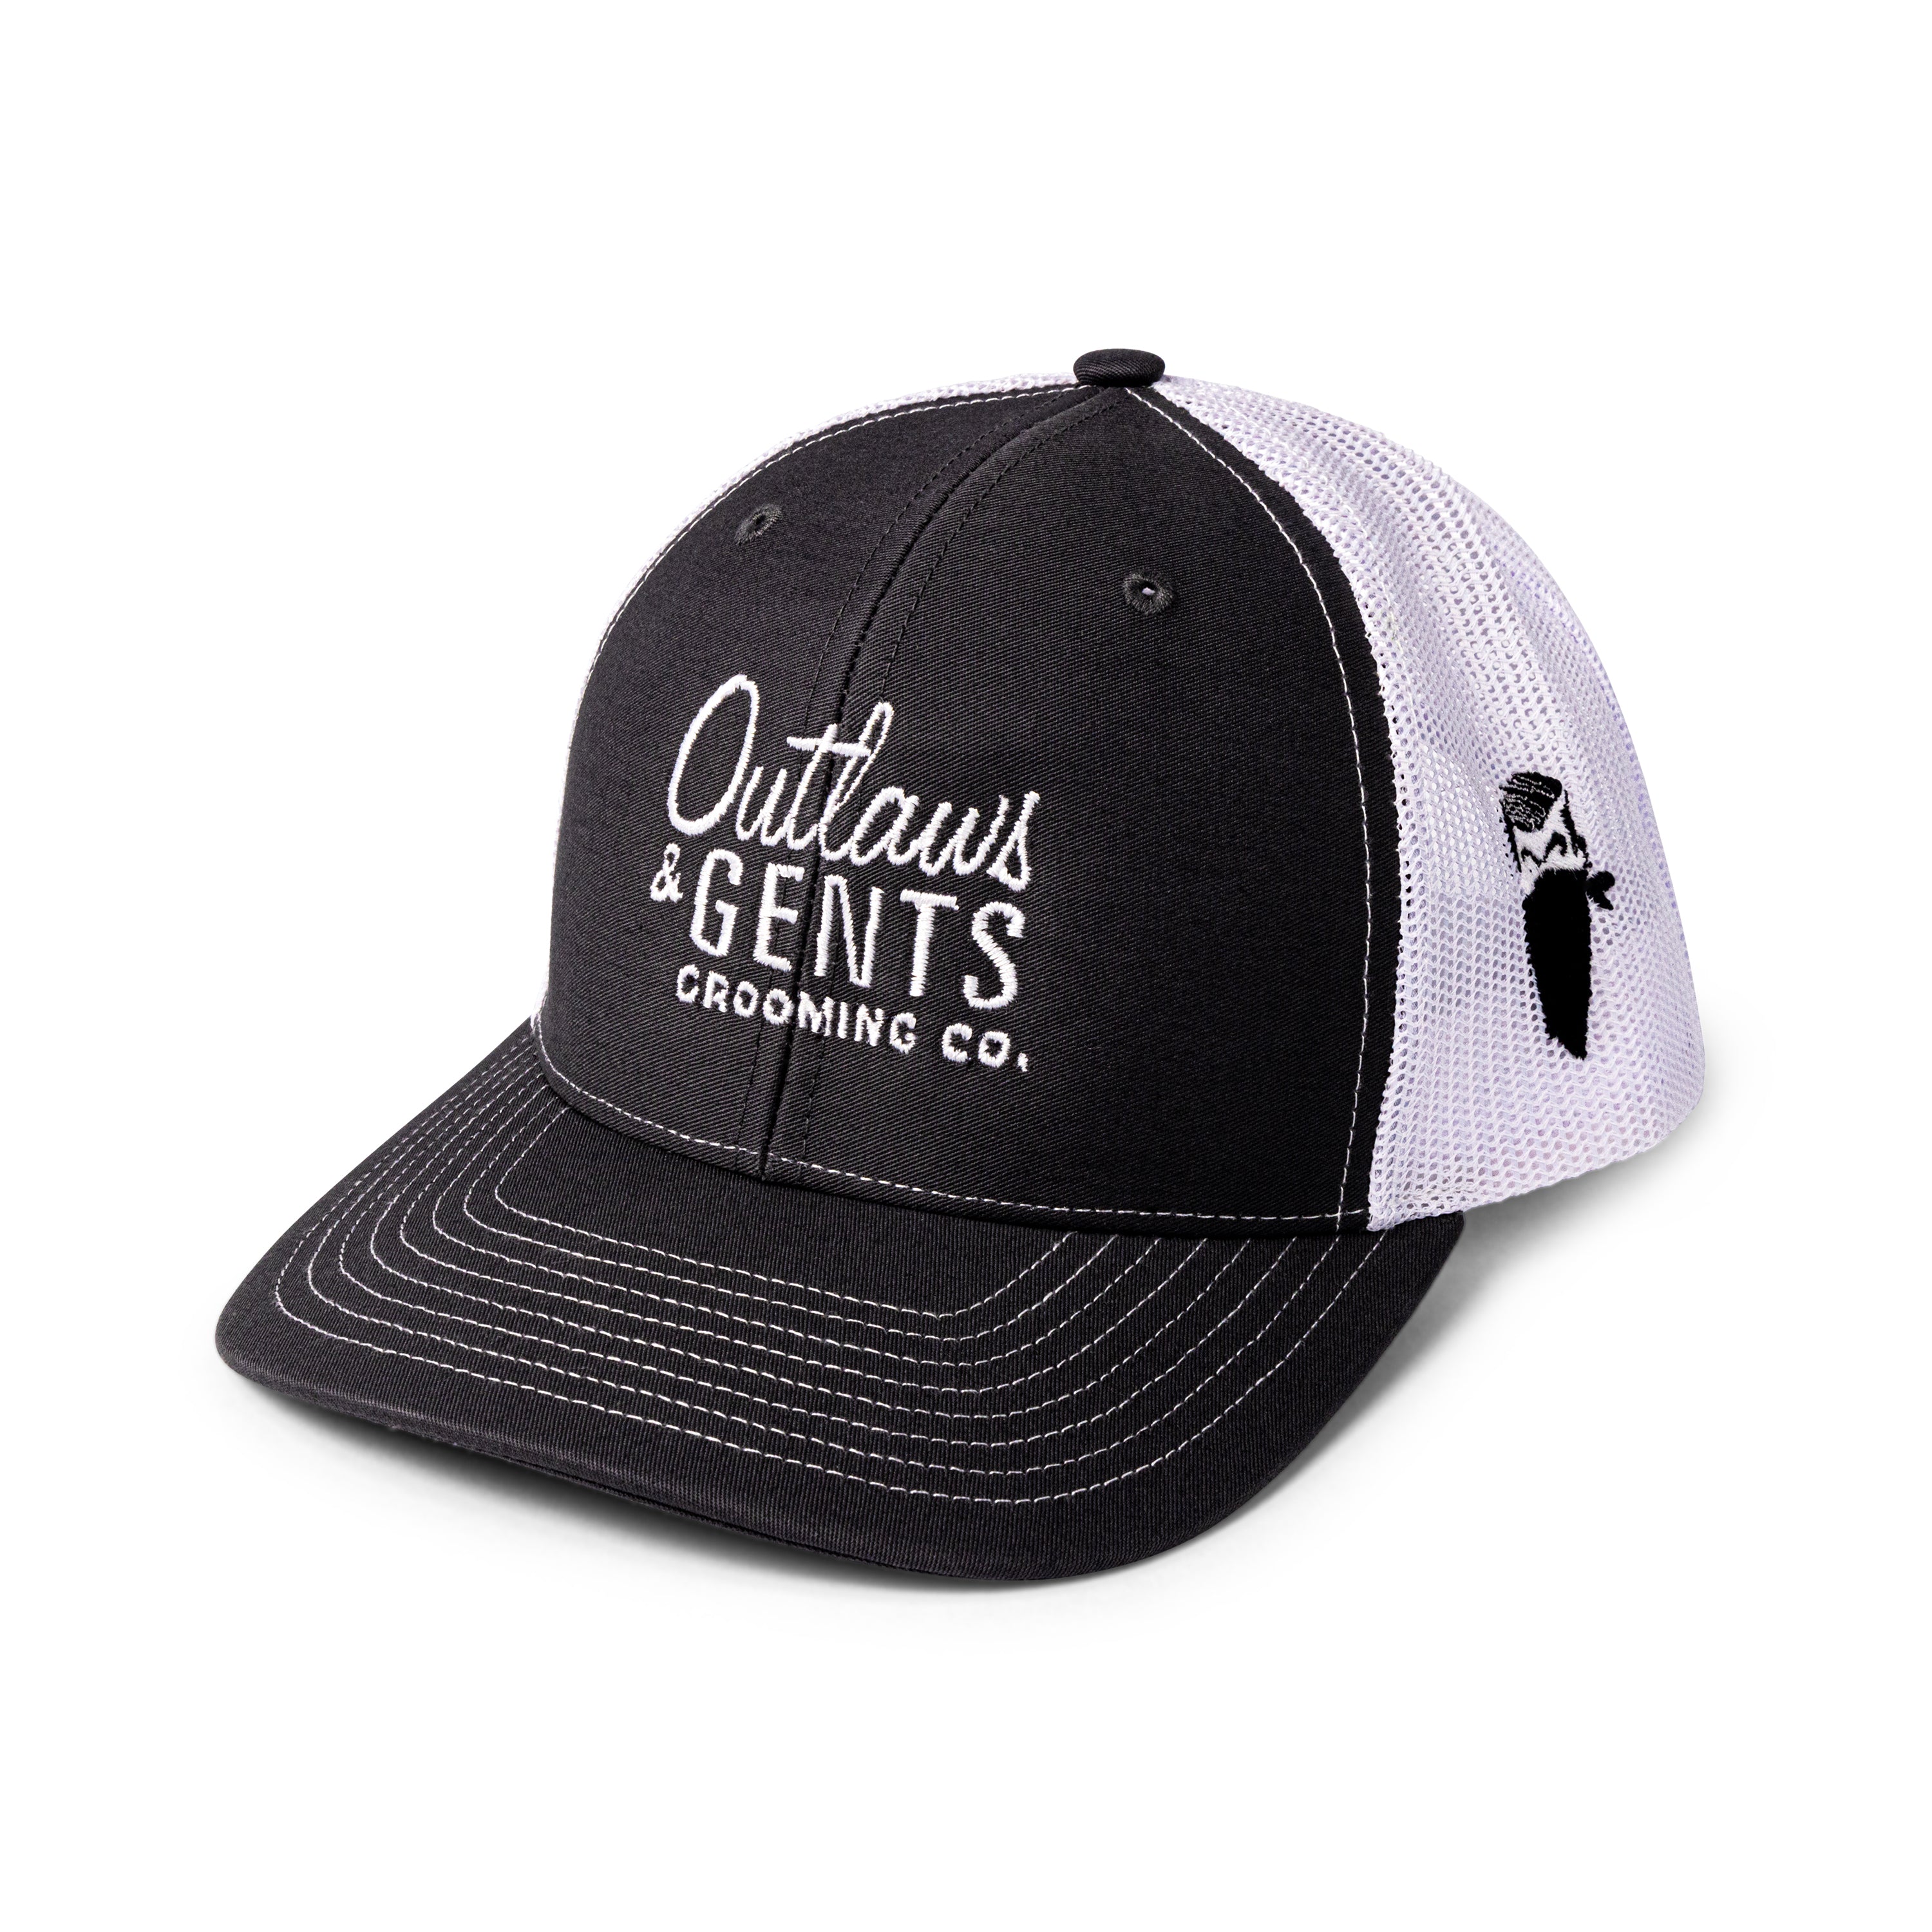 Outlaws & Gents Trucker Hat